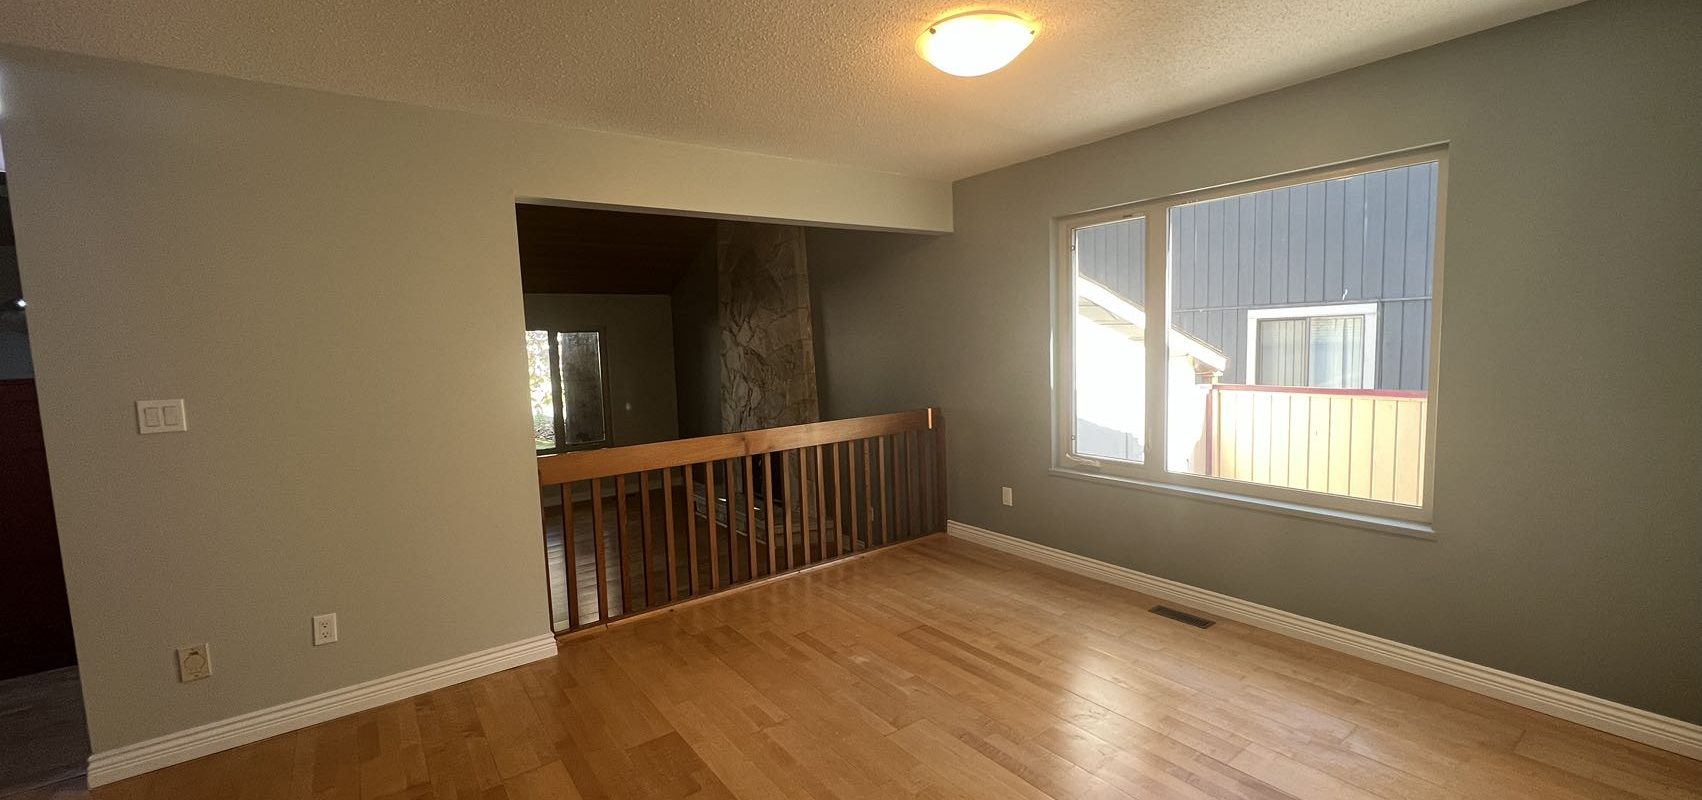 South Surrey Large 4Bd/3Ba Single Family House For Rent